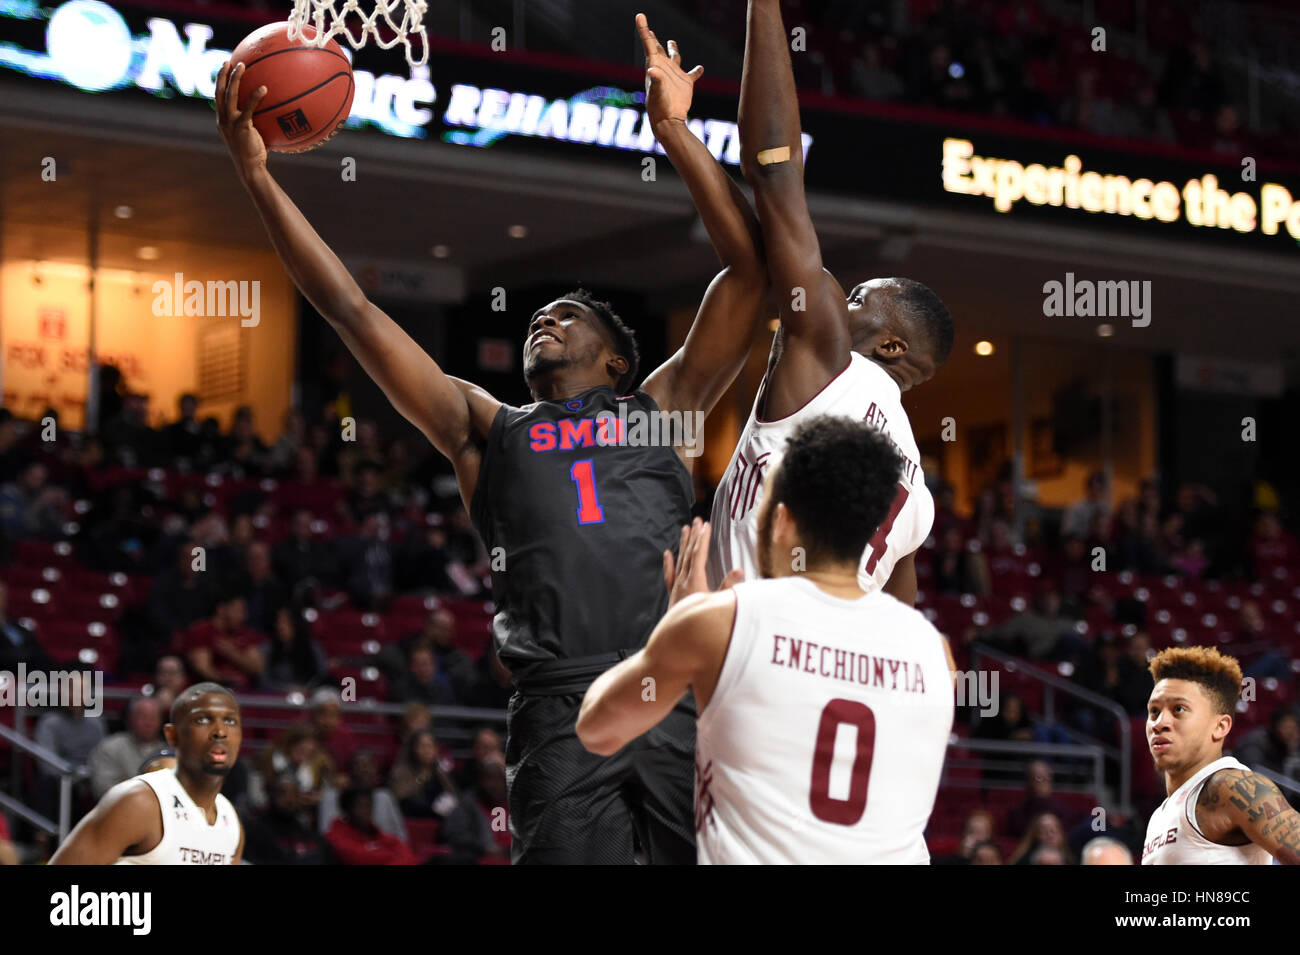 Philadelphia, Pennsylvania, USA. 9th Feb, 2017. Southern Methodist Mustangs guard SHAKE MILTON (1) puts up a shot as Temple Owls center ERNEST AFLAKPUI (24) goes for a block during the American Athletic Conference basketball game being played at the Liacouras Center in Philadelphia. SMU beat Temple 66-50. Credit: Ken Inness/ZUMA Wire/Alamy Live News Stock Photo